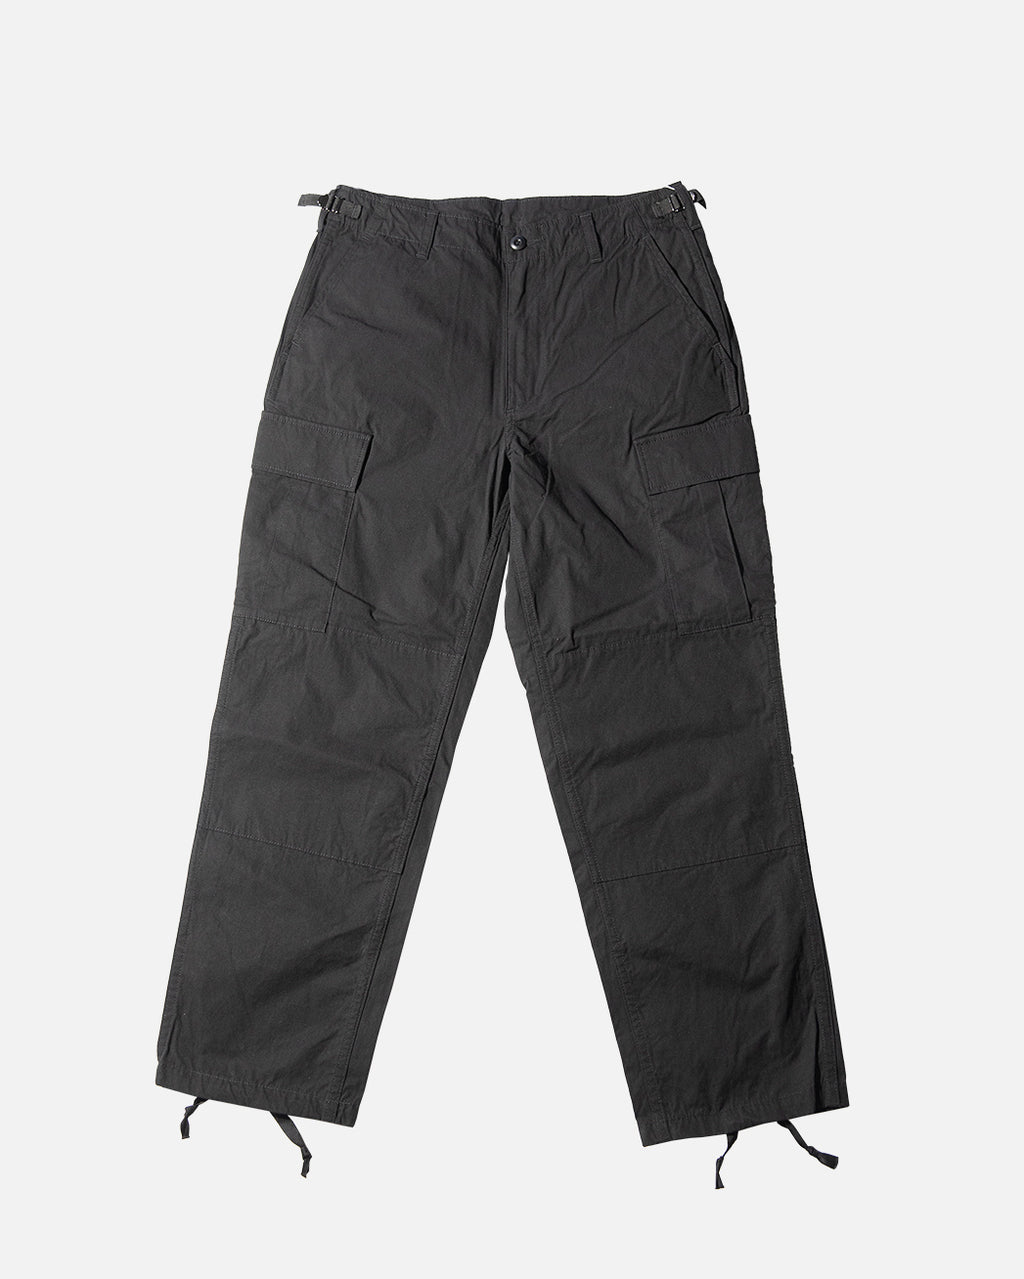 Wasted Youth CARGO PANTS BLACK XLサイズ - ワークパンツ